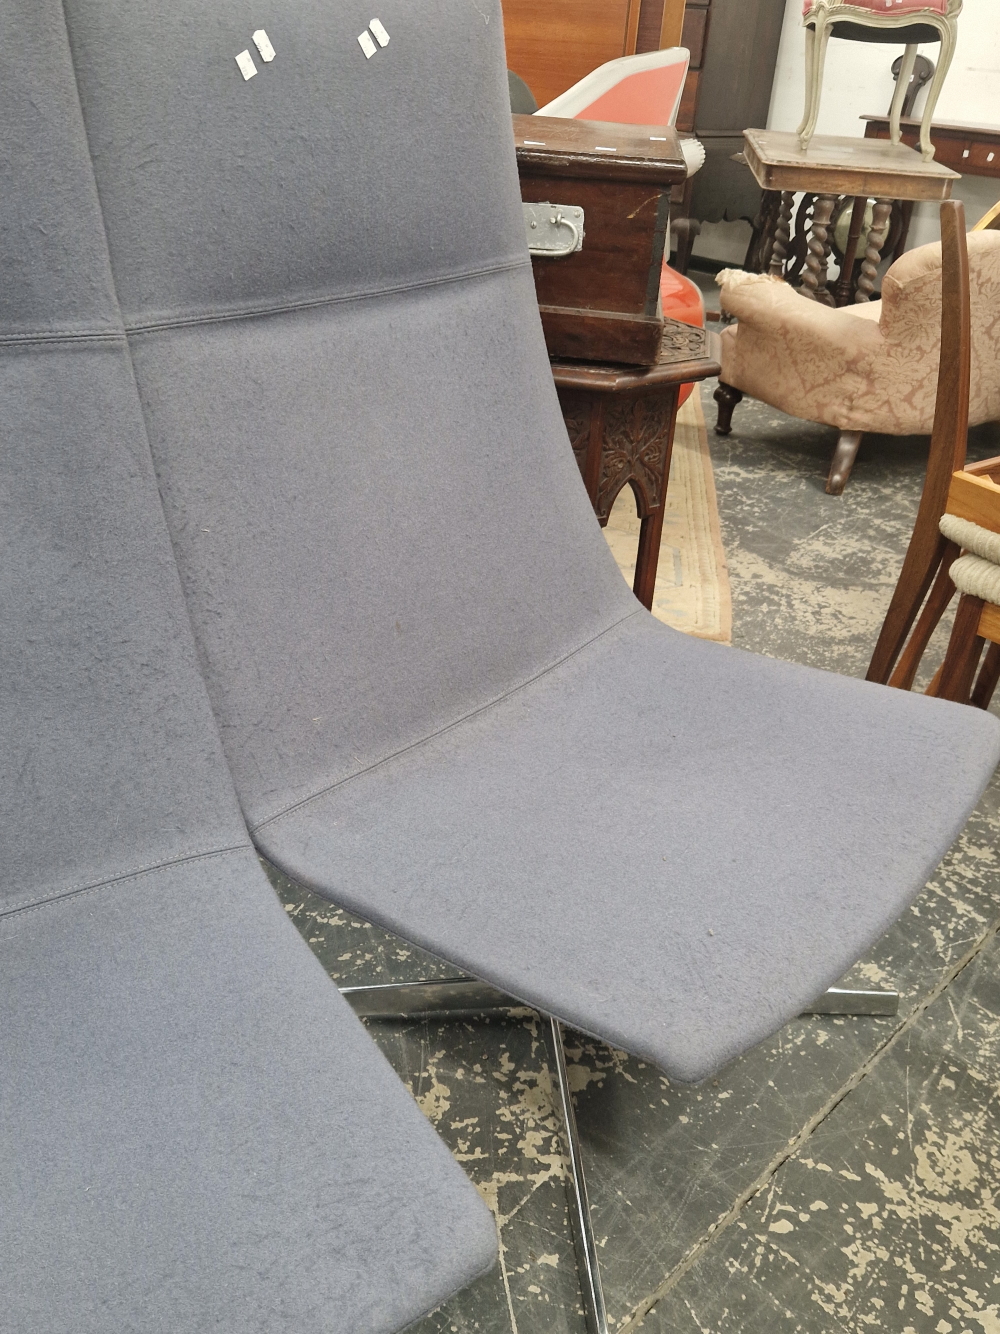 A PAIR OF JADE GREY UPHOLSTERED CHAIRS WITH THE RECTANGULAR BACKS RUNNING DOWN TO THE SEATS AND - Image 3 of 5